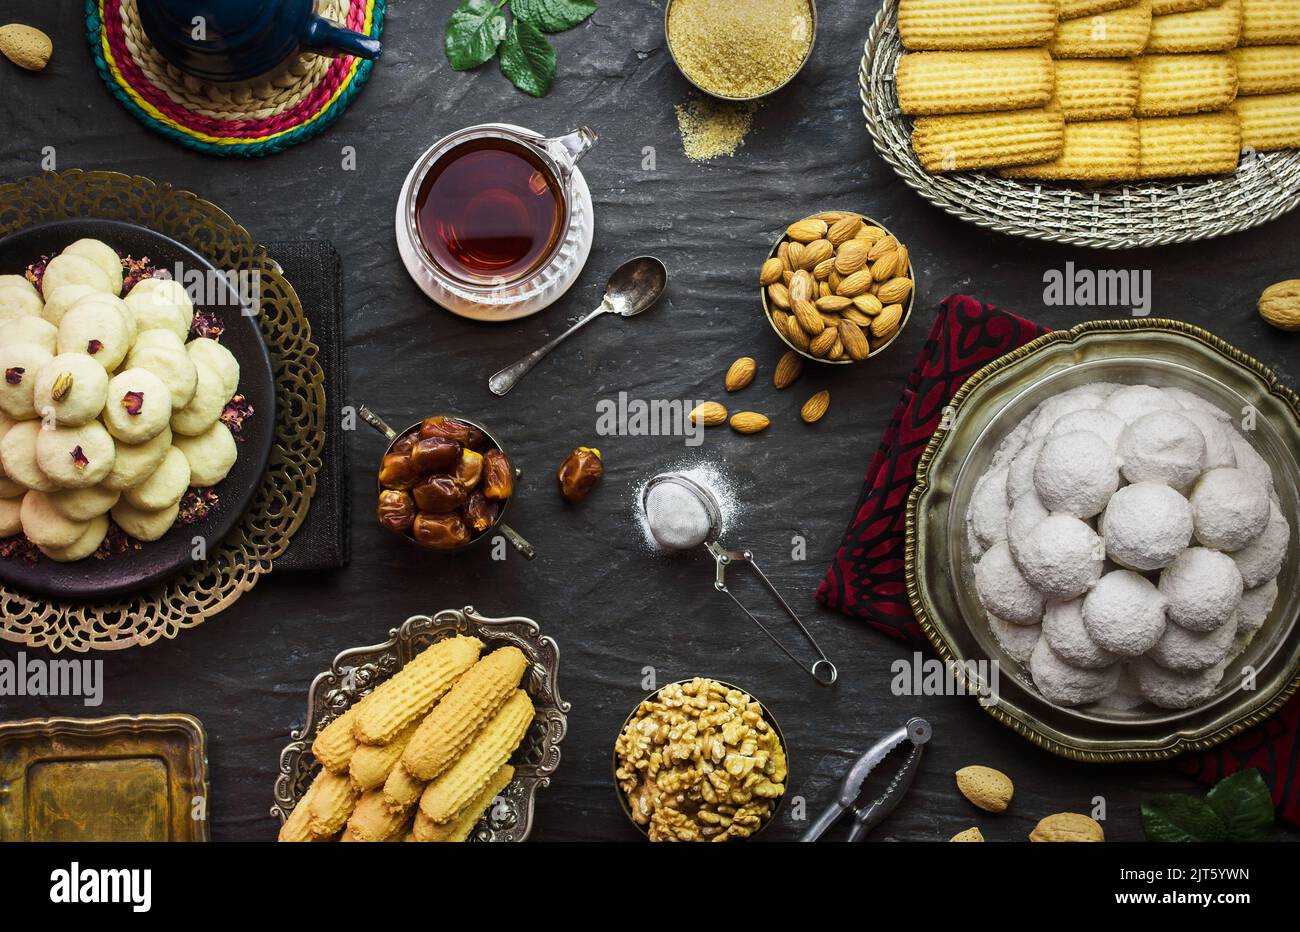 Cookies for celebration of El-Fitr Islamic Feast(The Feast that comes after Ramadan). Varities of Eid Al-Fitr sweets (Kahk-Gorayeba-Biscuits). Stock Photo